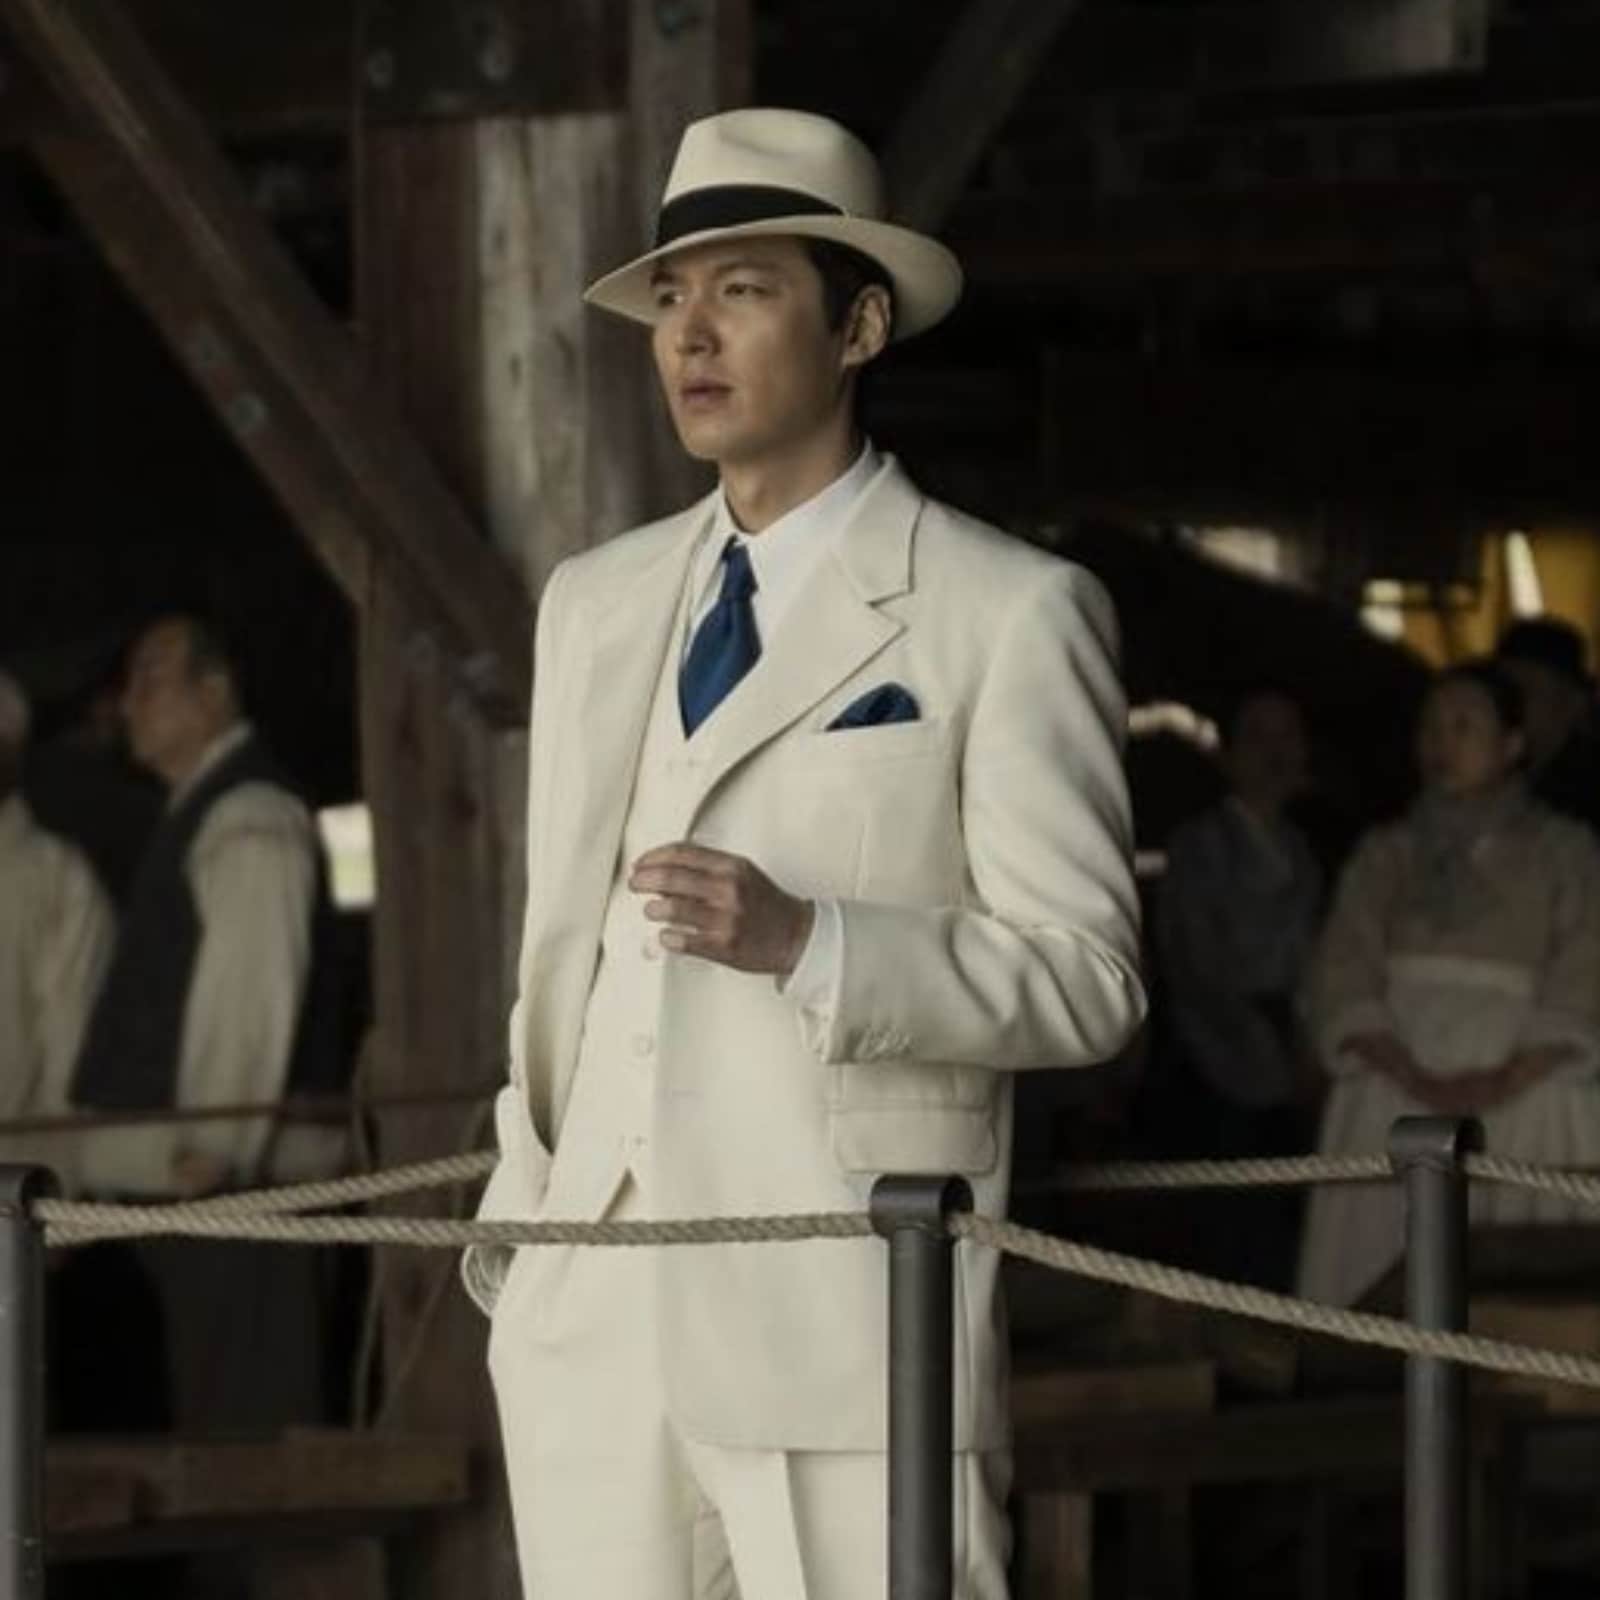 Pachinko First Look: Lee Min Ho Introduces Fans To Koh Hansu, Series Premiere Date Announced